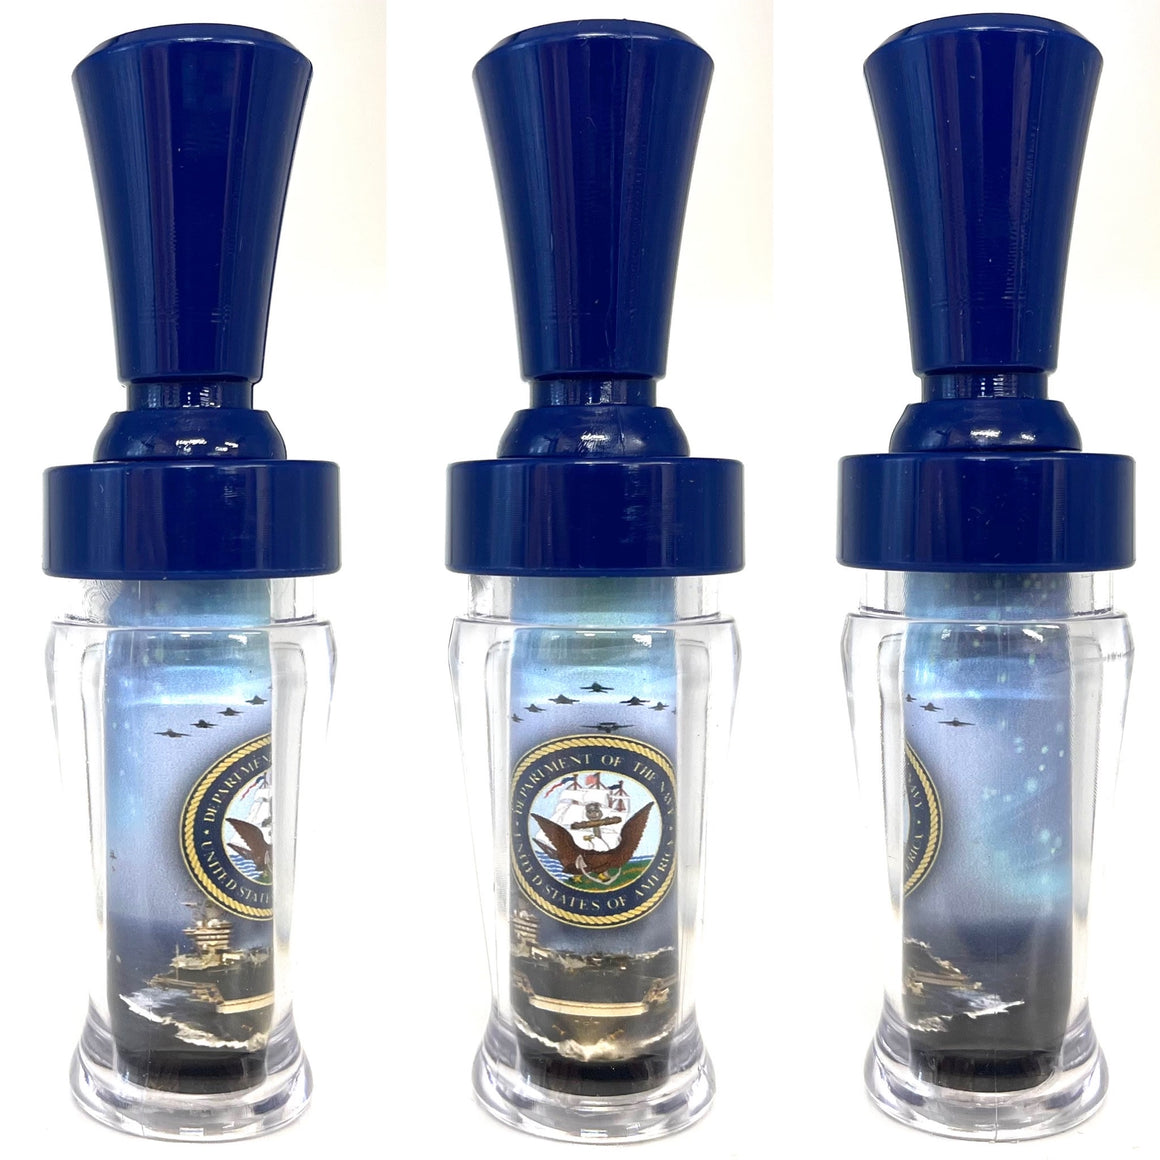 POLYCARBONATE IMAGE DUCK CALL NAVY